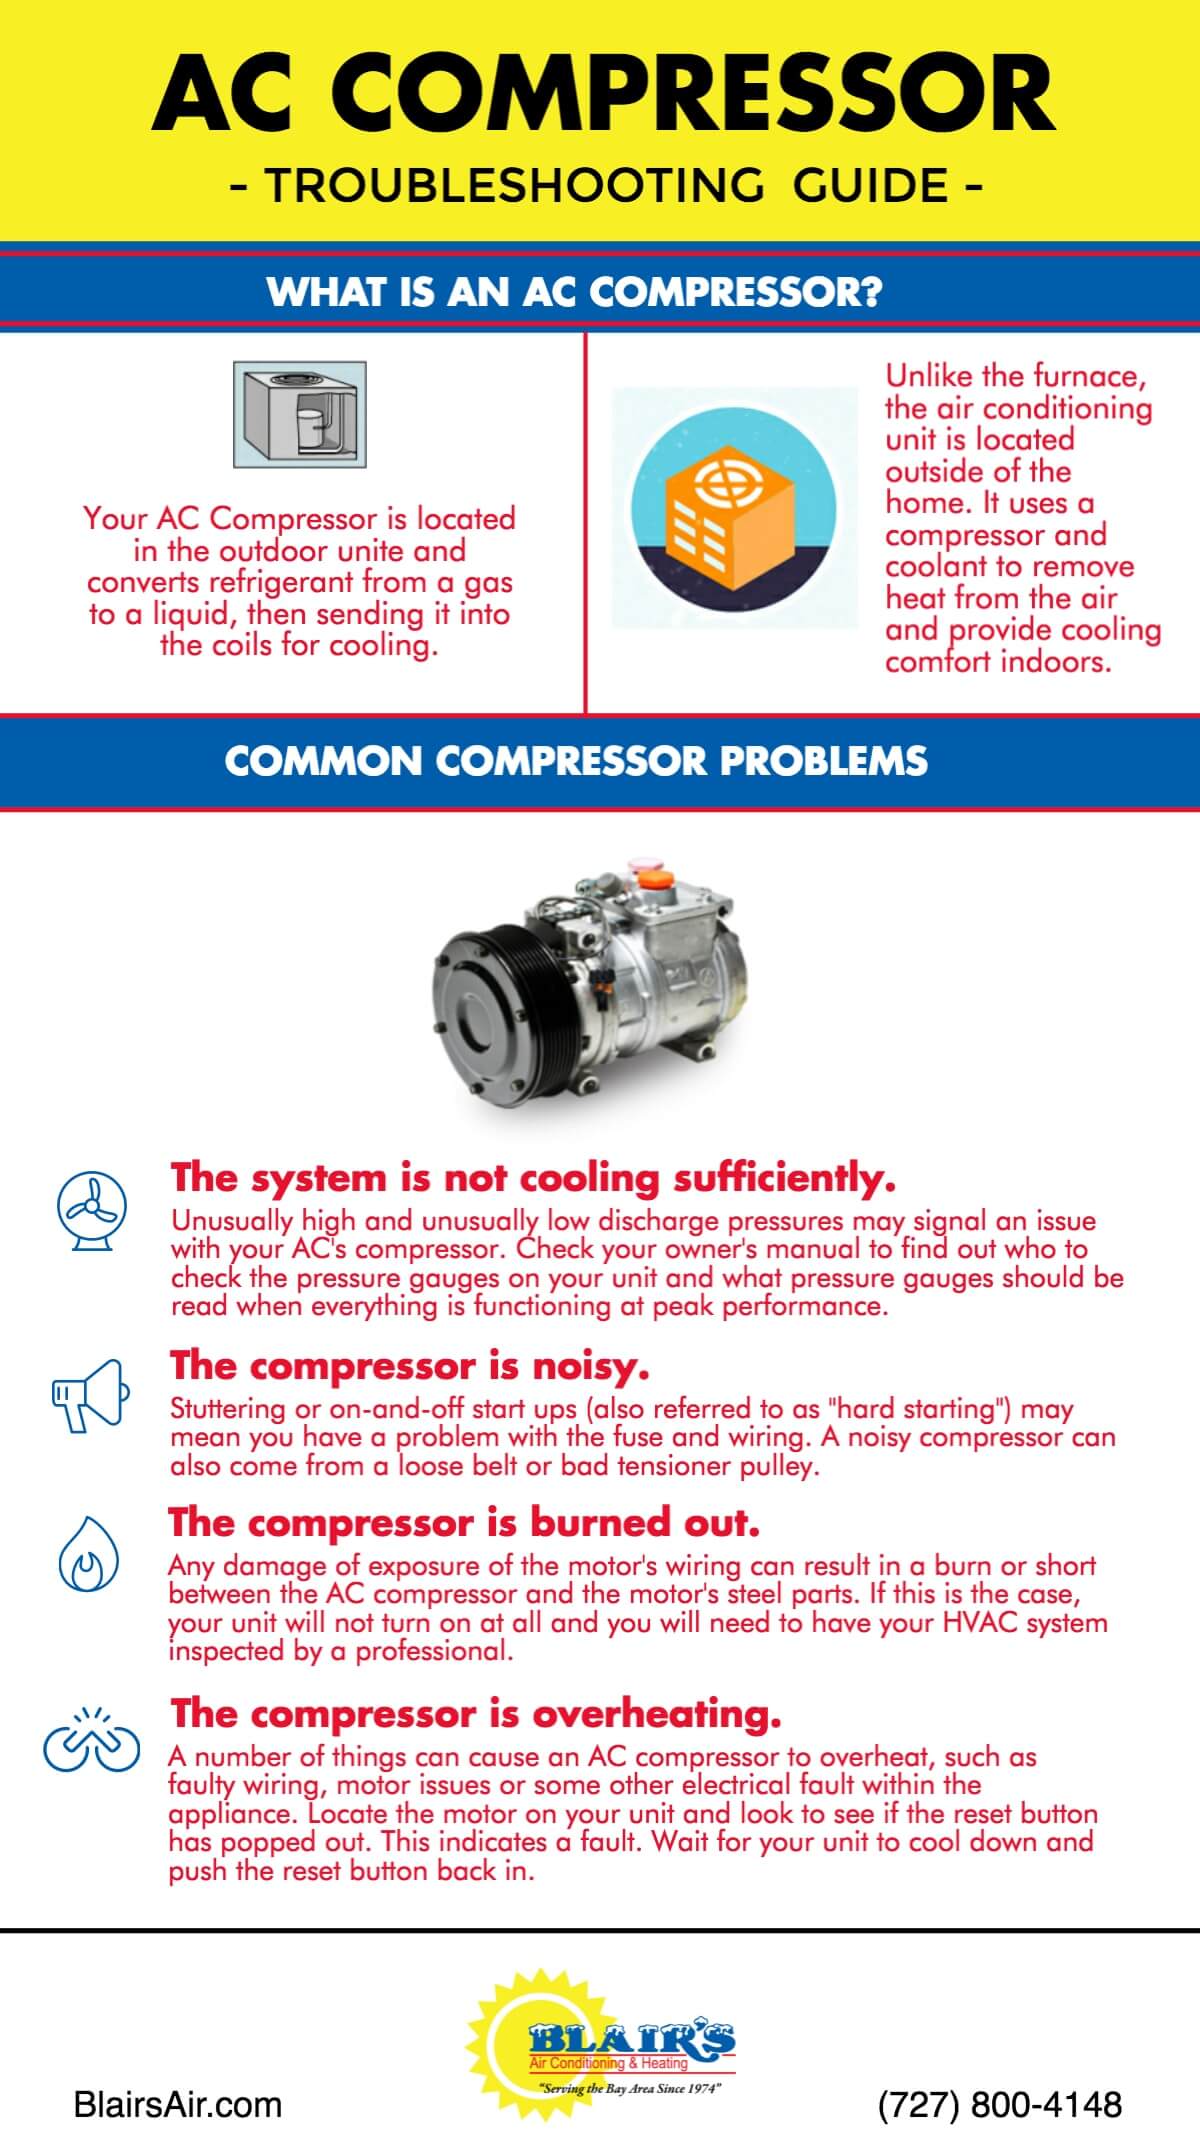 How to Know If Air Conditioner Compressor is Bad